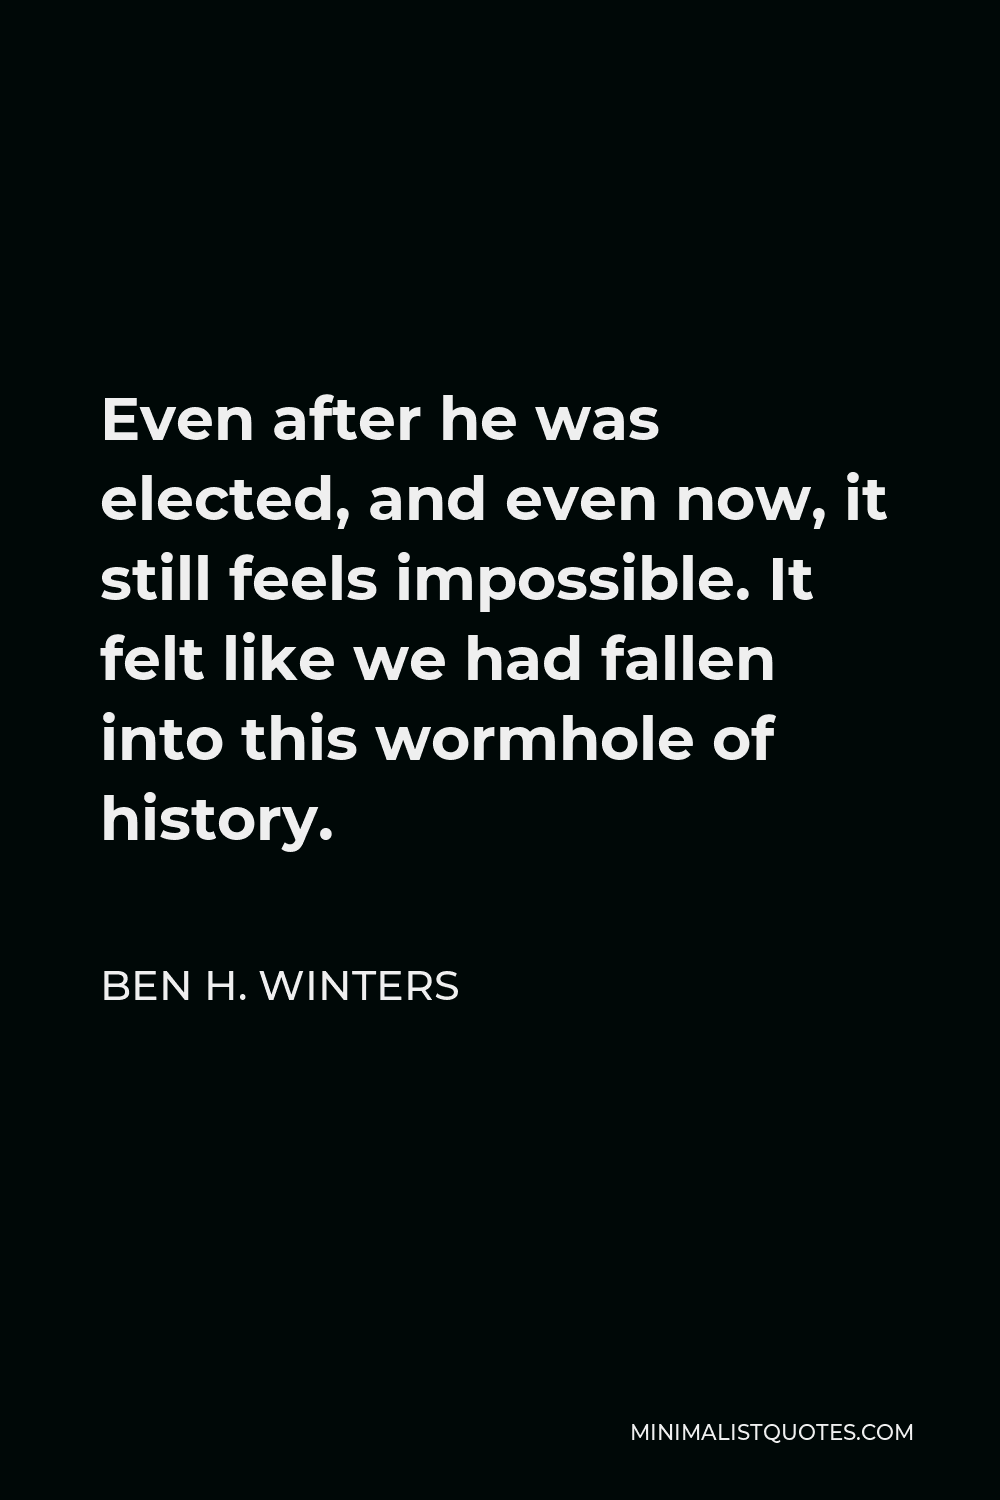 Ben H. Winters Quote - Even after he was elected, and even now, it still feels impossible. It felt like we had fallen into this wormhole of history.